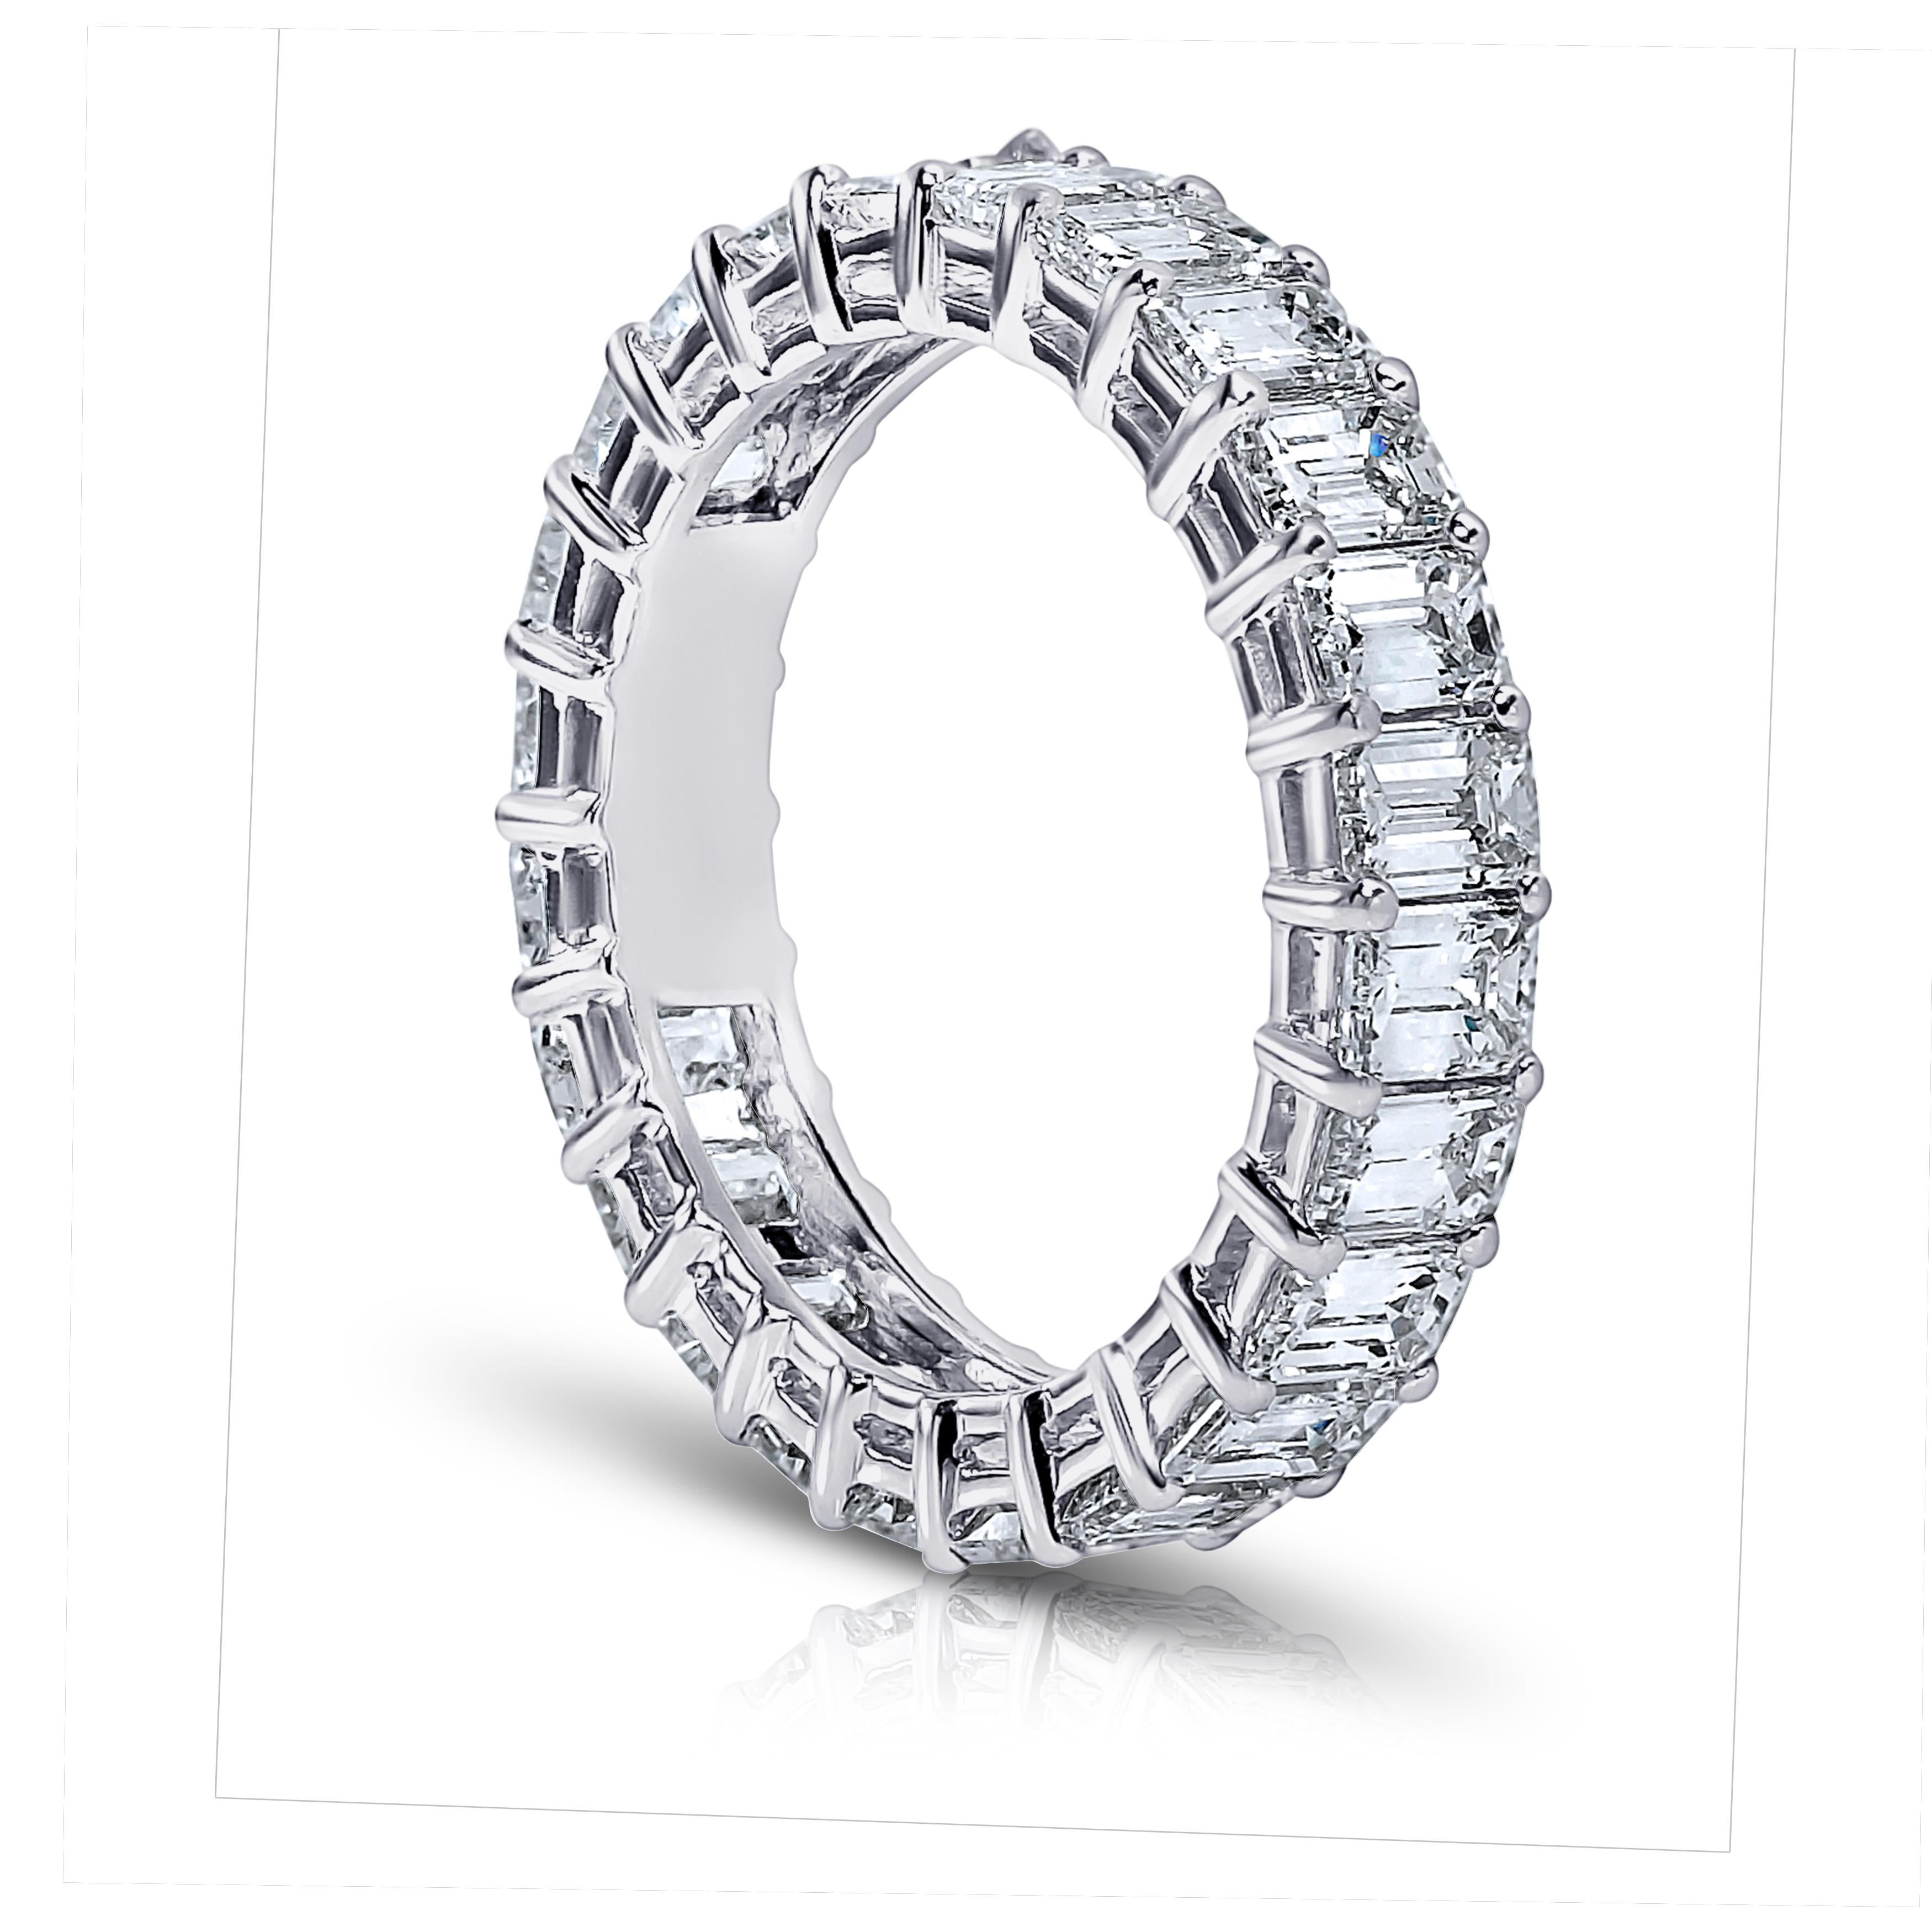 Emerald Cut diamond ring platinum eternity band shared prong style with a gallery.
21 perfectly matched diamonds weighing a minimum of 6.30 cts. G.I.A certificates for each diamond . Ranging from D-F in color . VVS1-VS2 in clarity .Finger size 7.